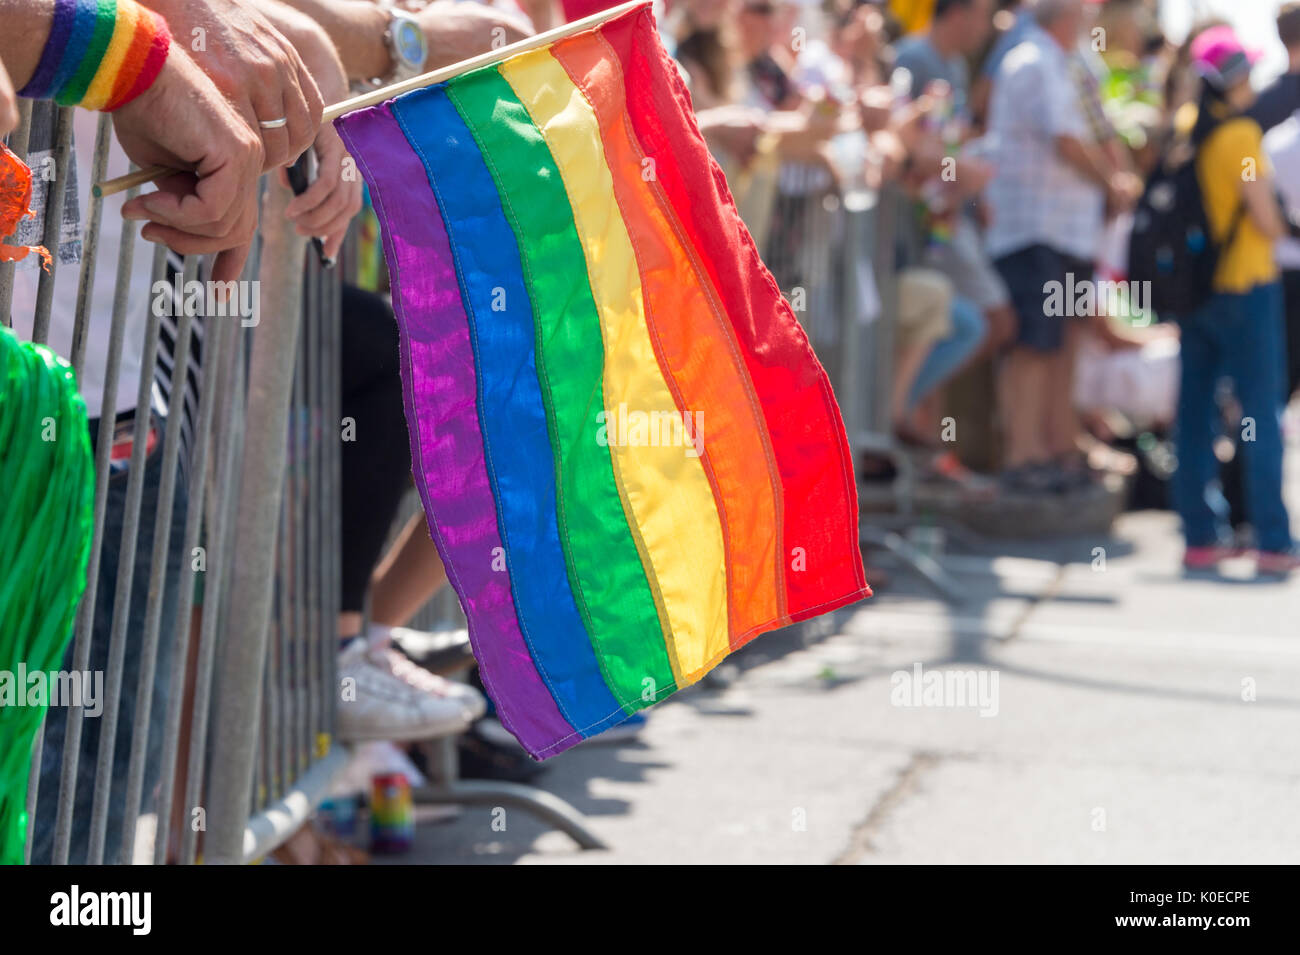 Montreal, CANADA - 20 August 2017: Gay rainbow flag at Montreal gay pride parade with blurred spectators in the background Stock Photo